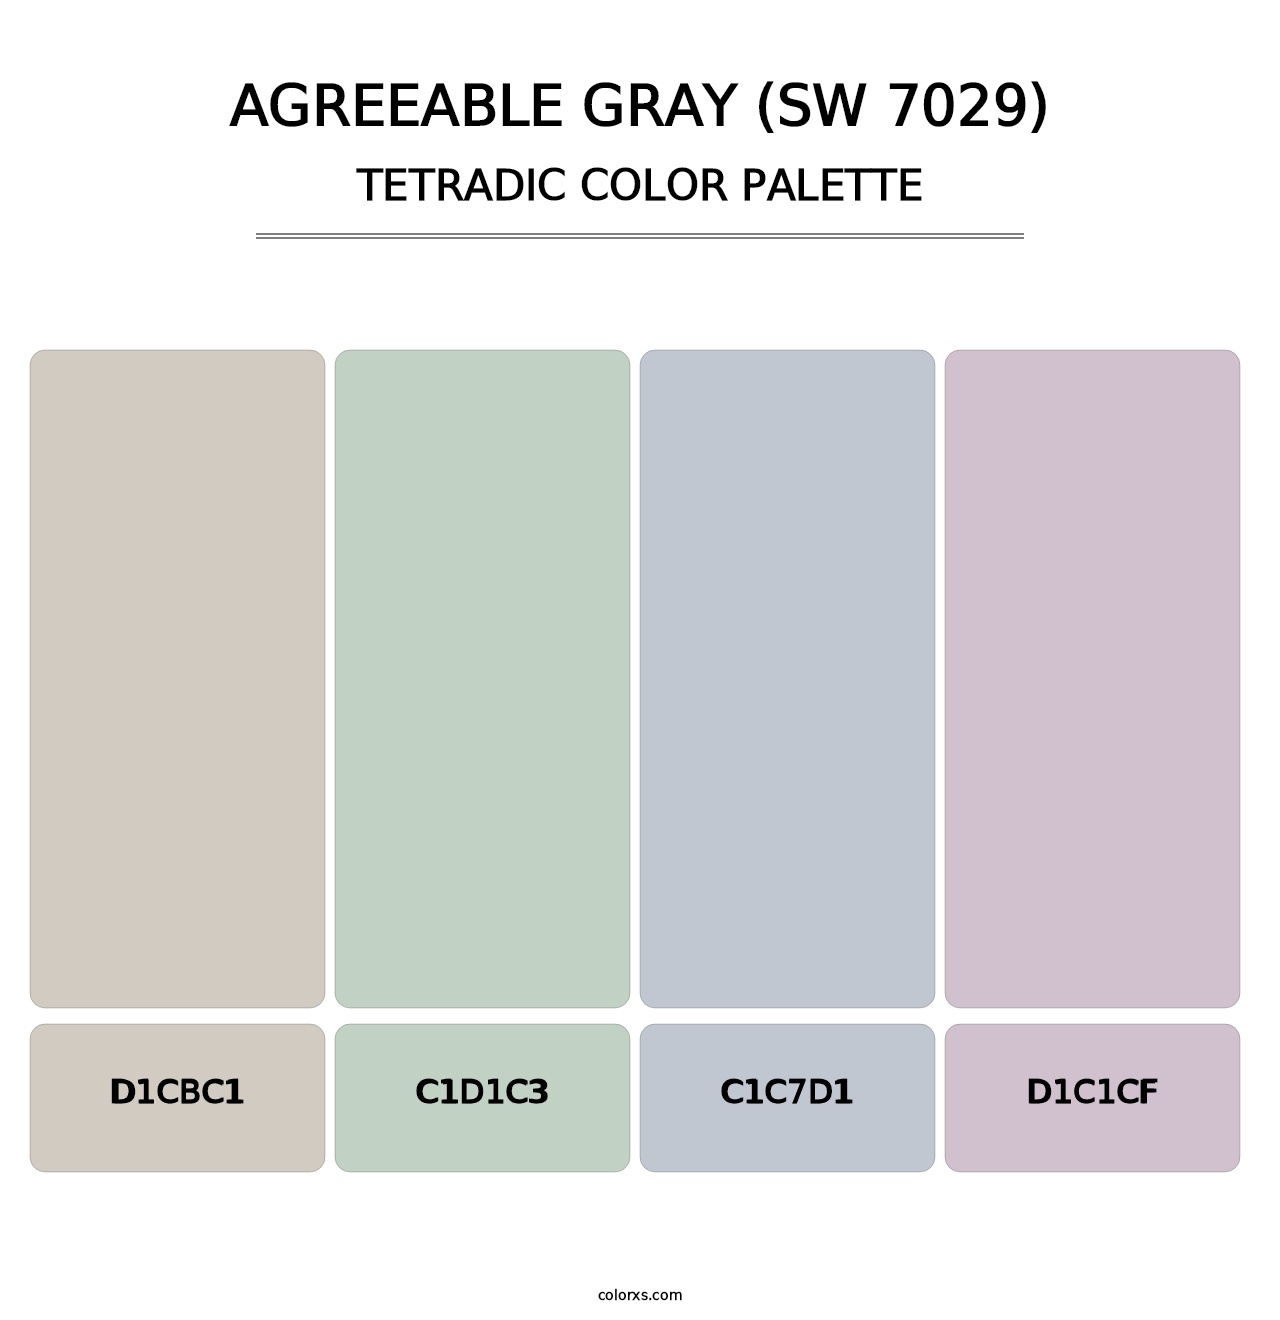 Agreeable Gray (SW 7029) - Tetradic Color Palette